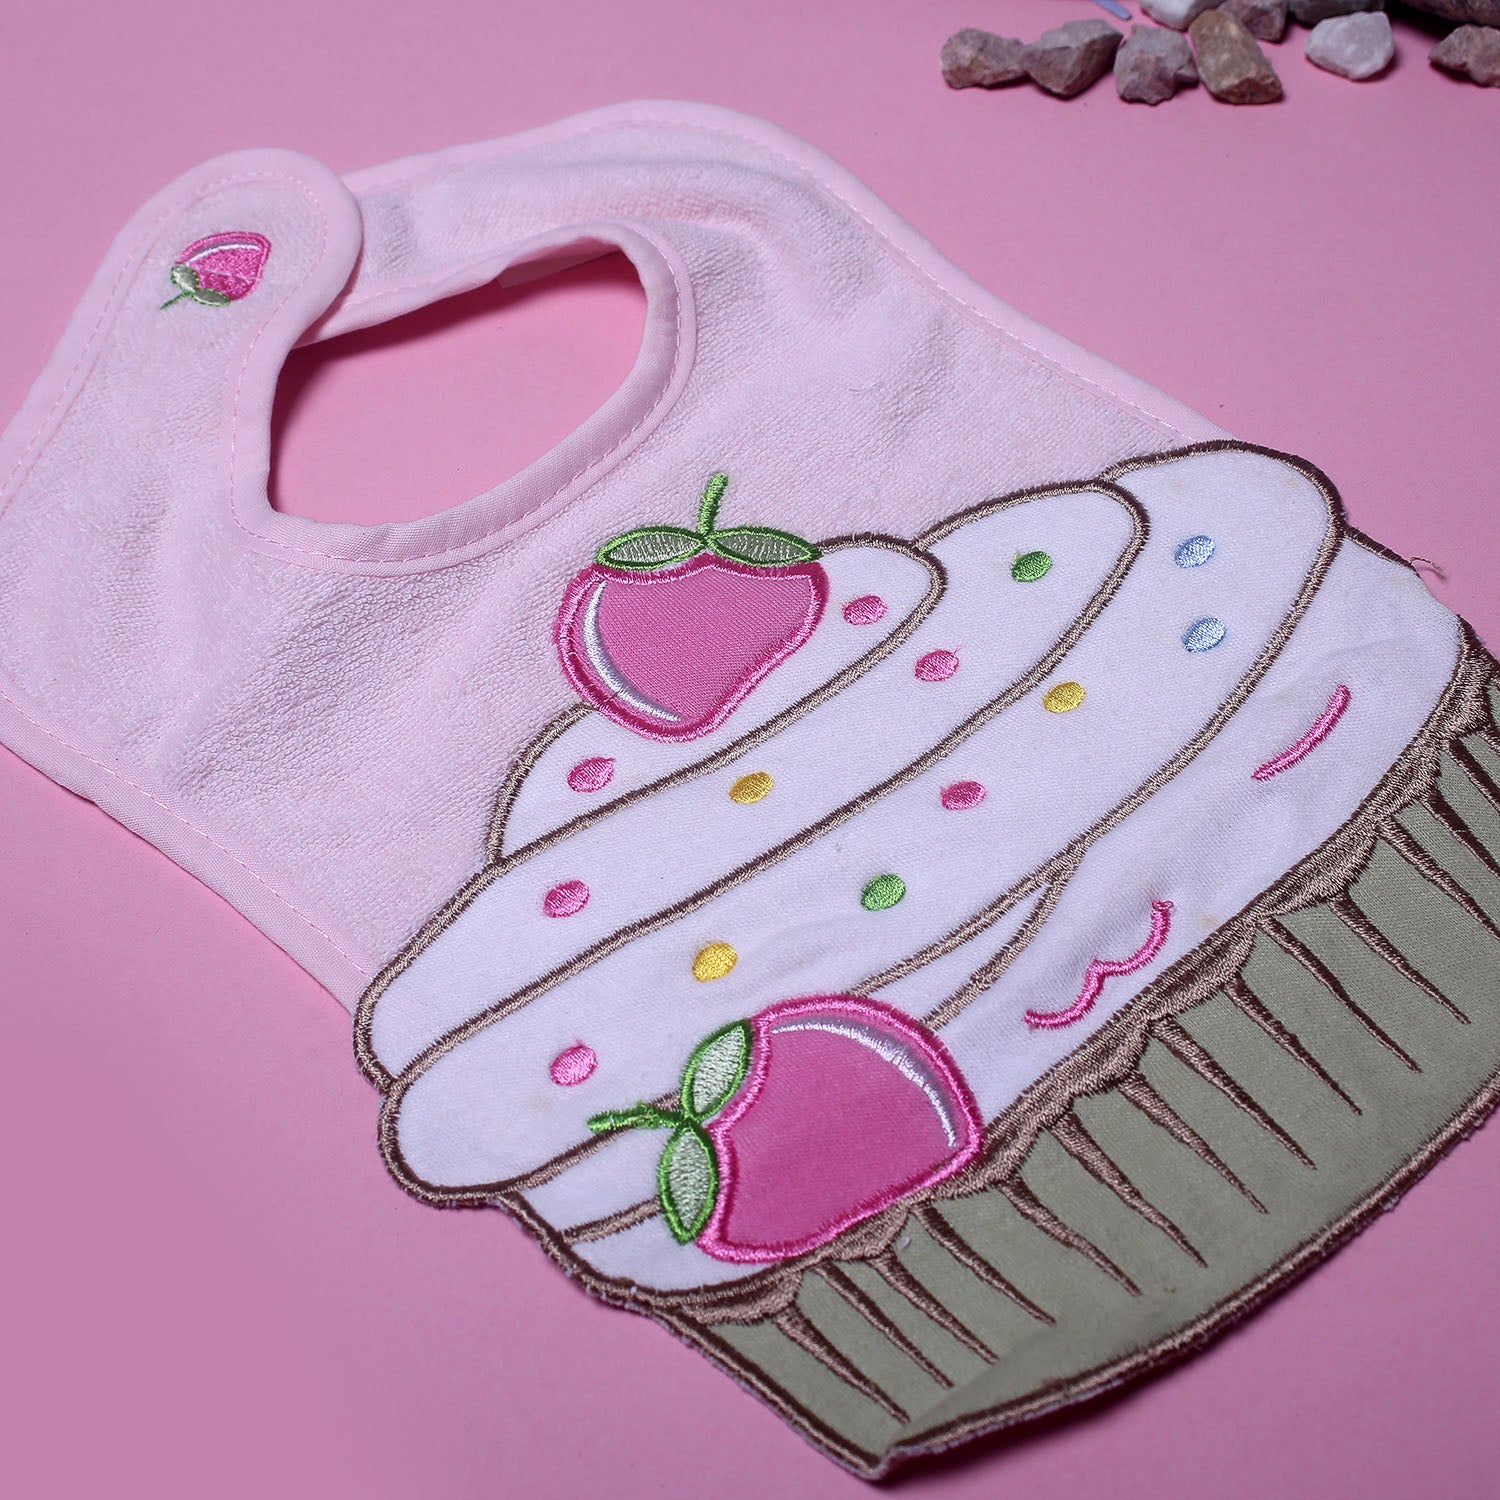 NEW PINK CUPCAKE MUFFIN EMBOIDERED BIB FOR BABIES